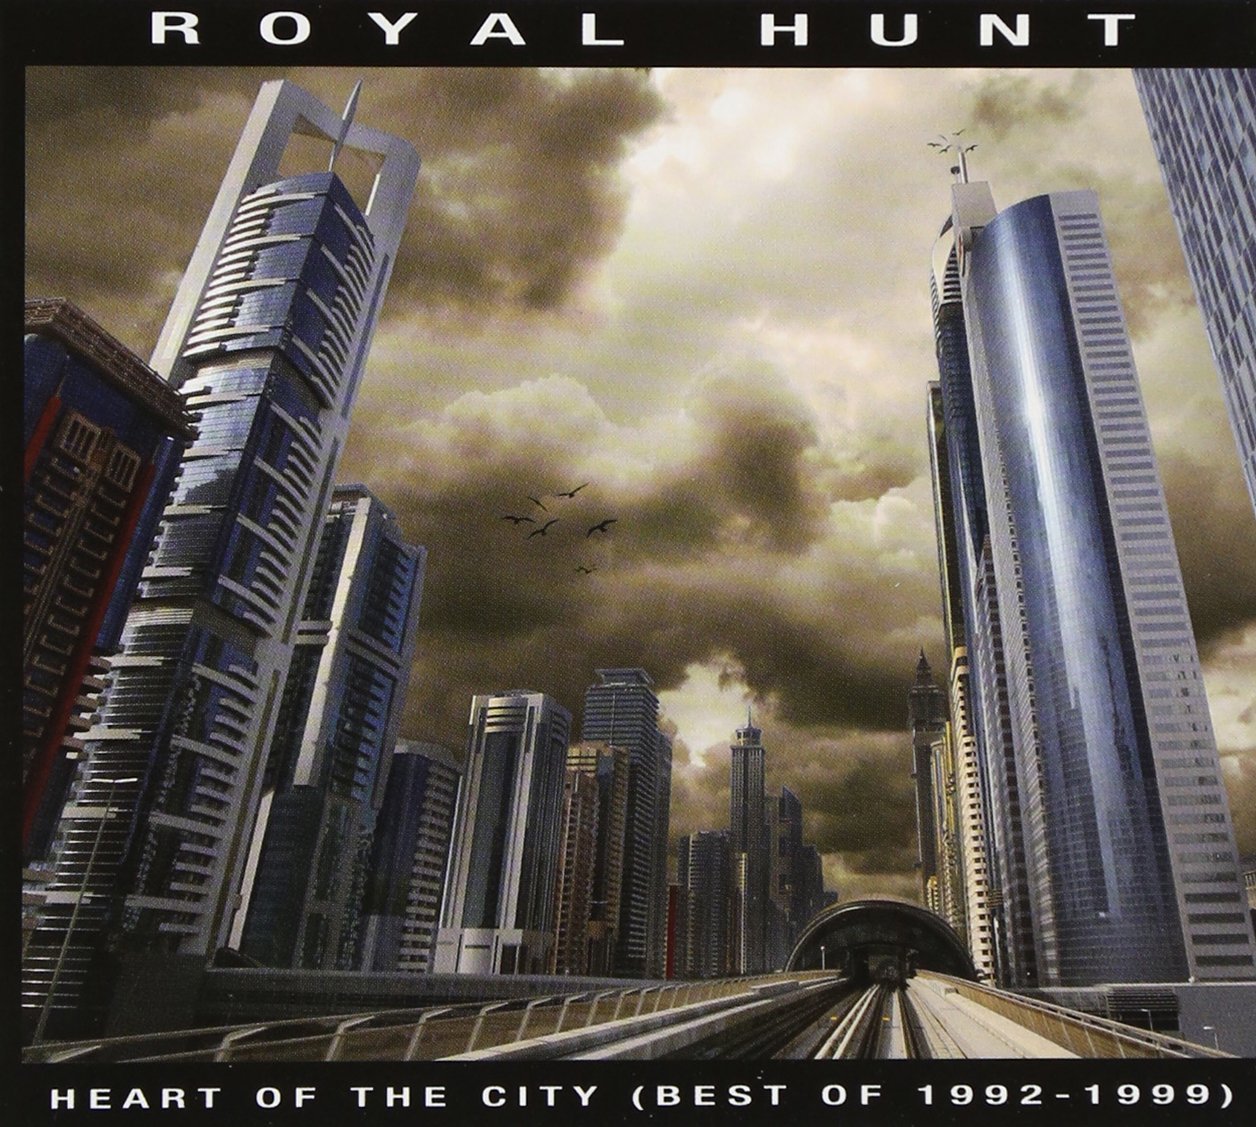 Royal Hunt : Heart of the City (Best of 1992-1999). Album Cover